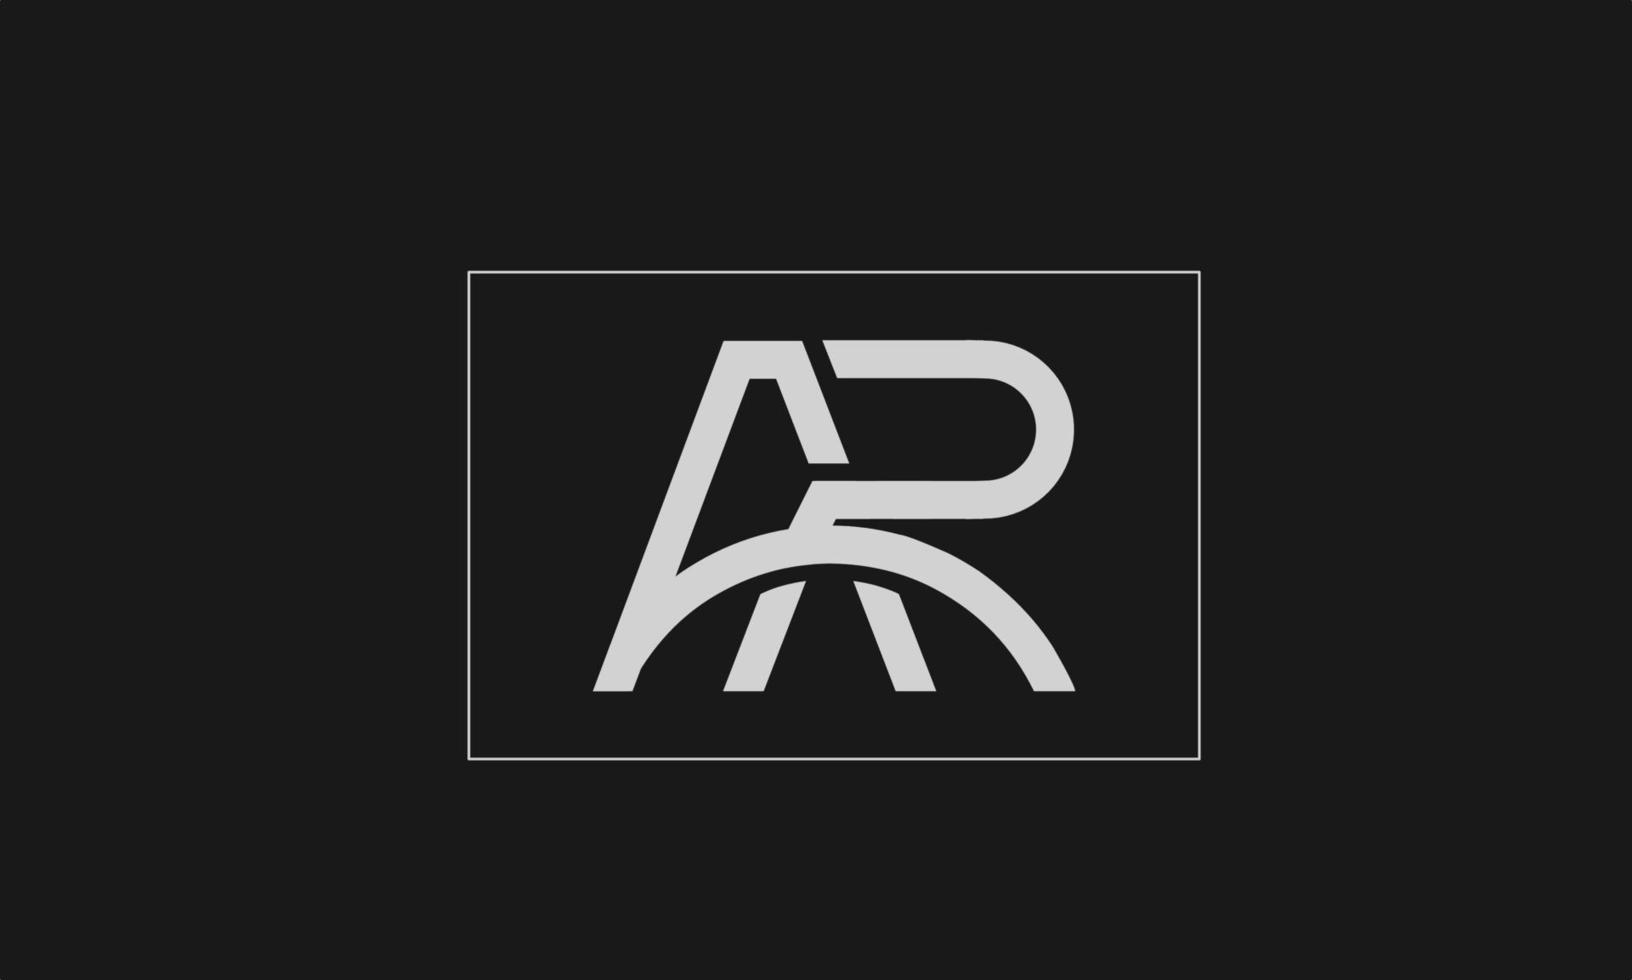 ar logo design template, letter a and r logo vector combined into one.